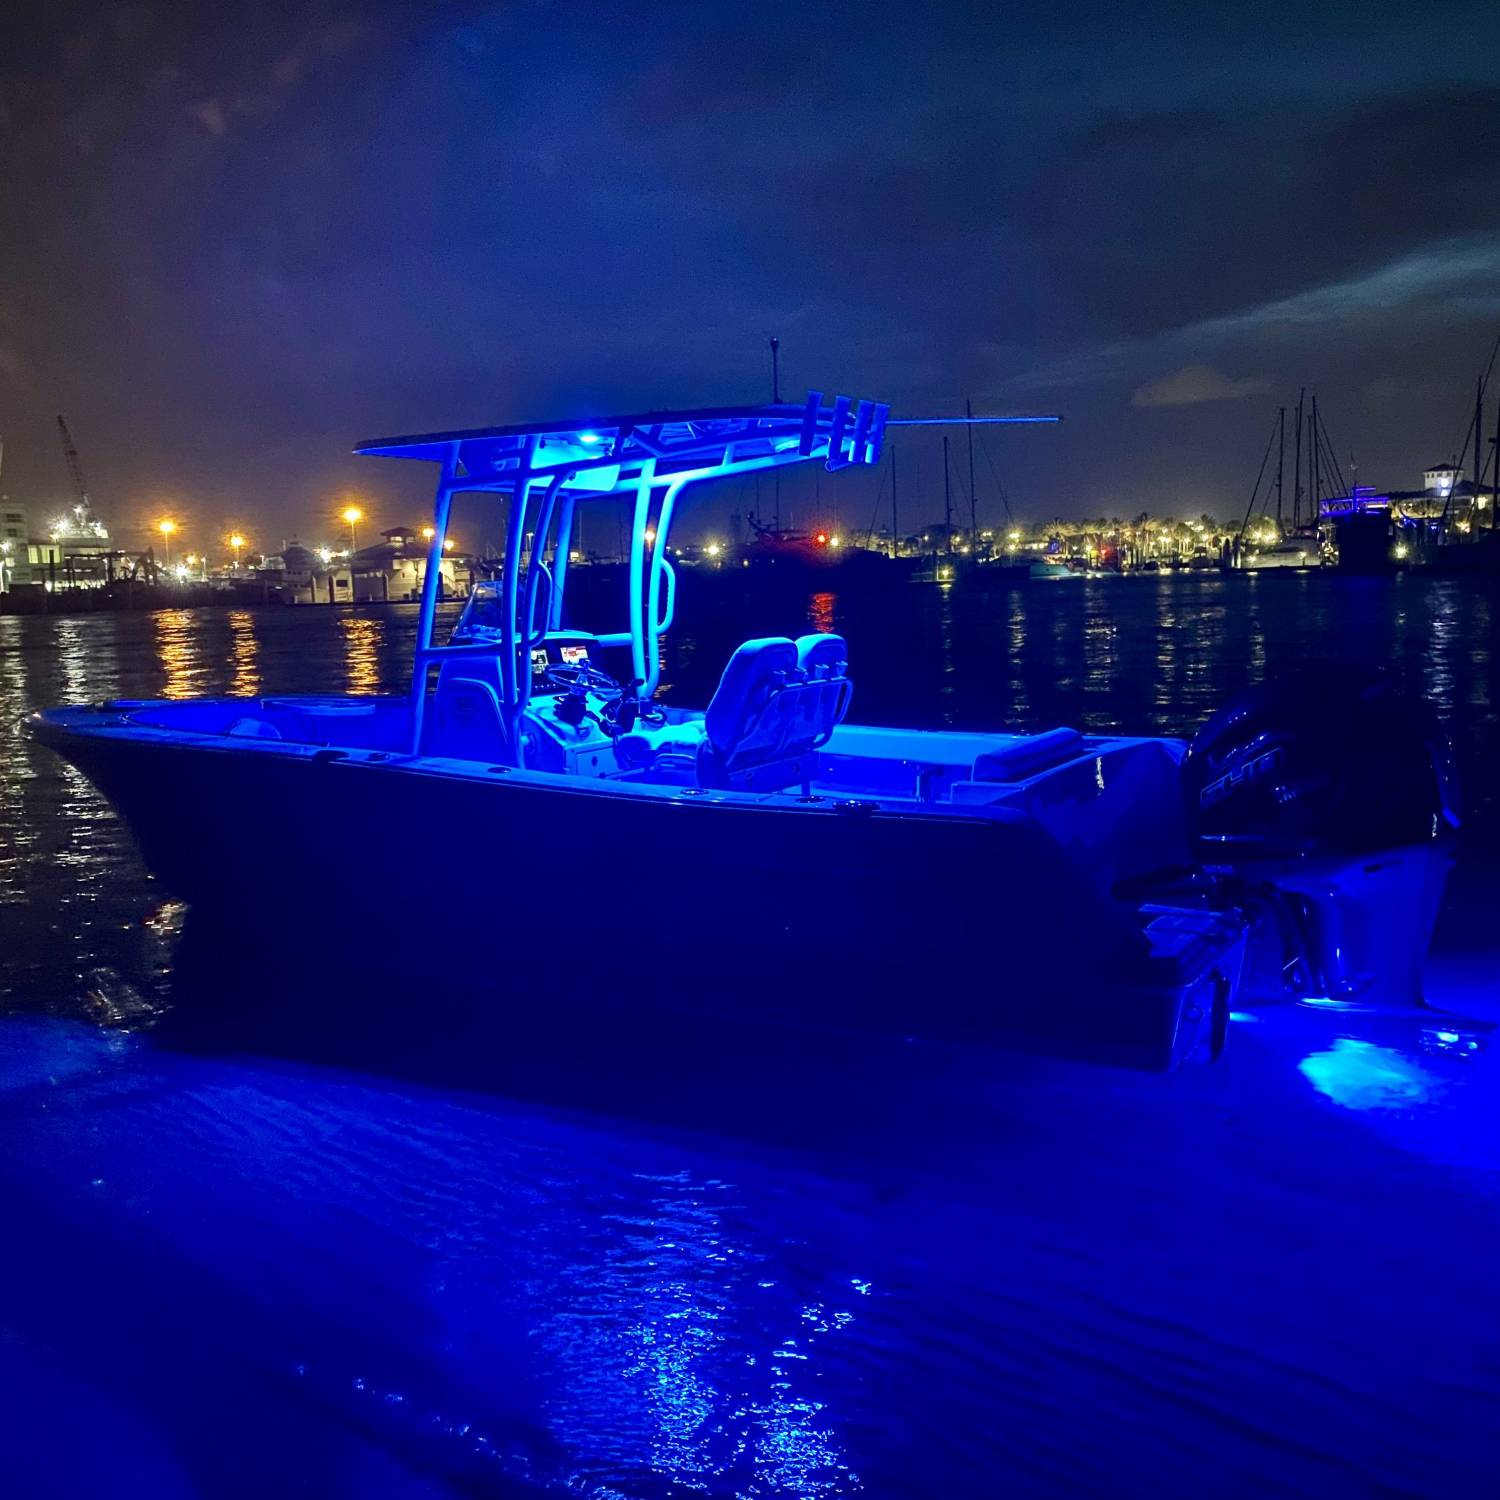 We pulled up to the sand bar during a night cruise to snap a picture of our beautiful 232 Open...